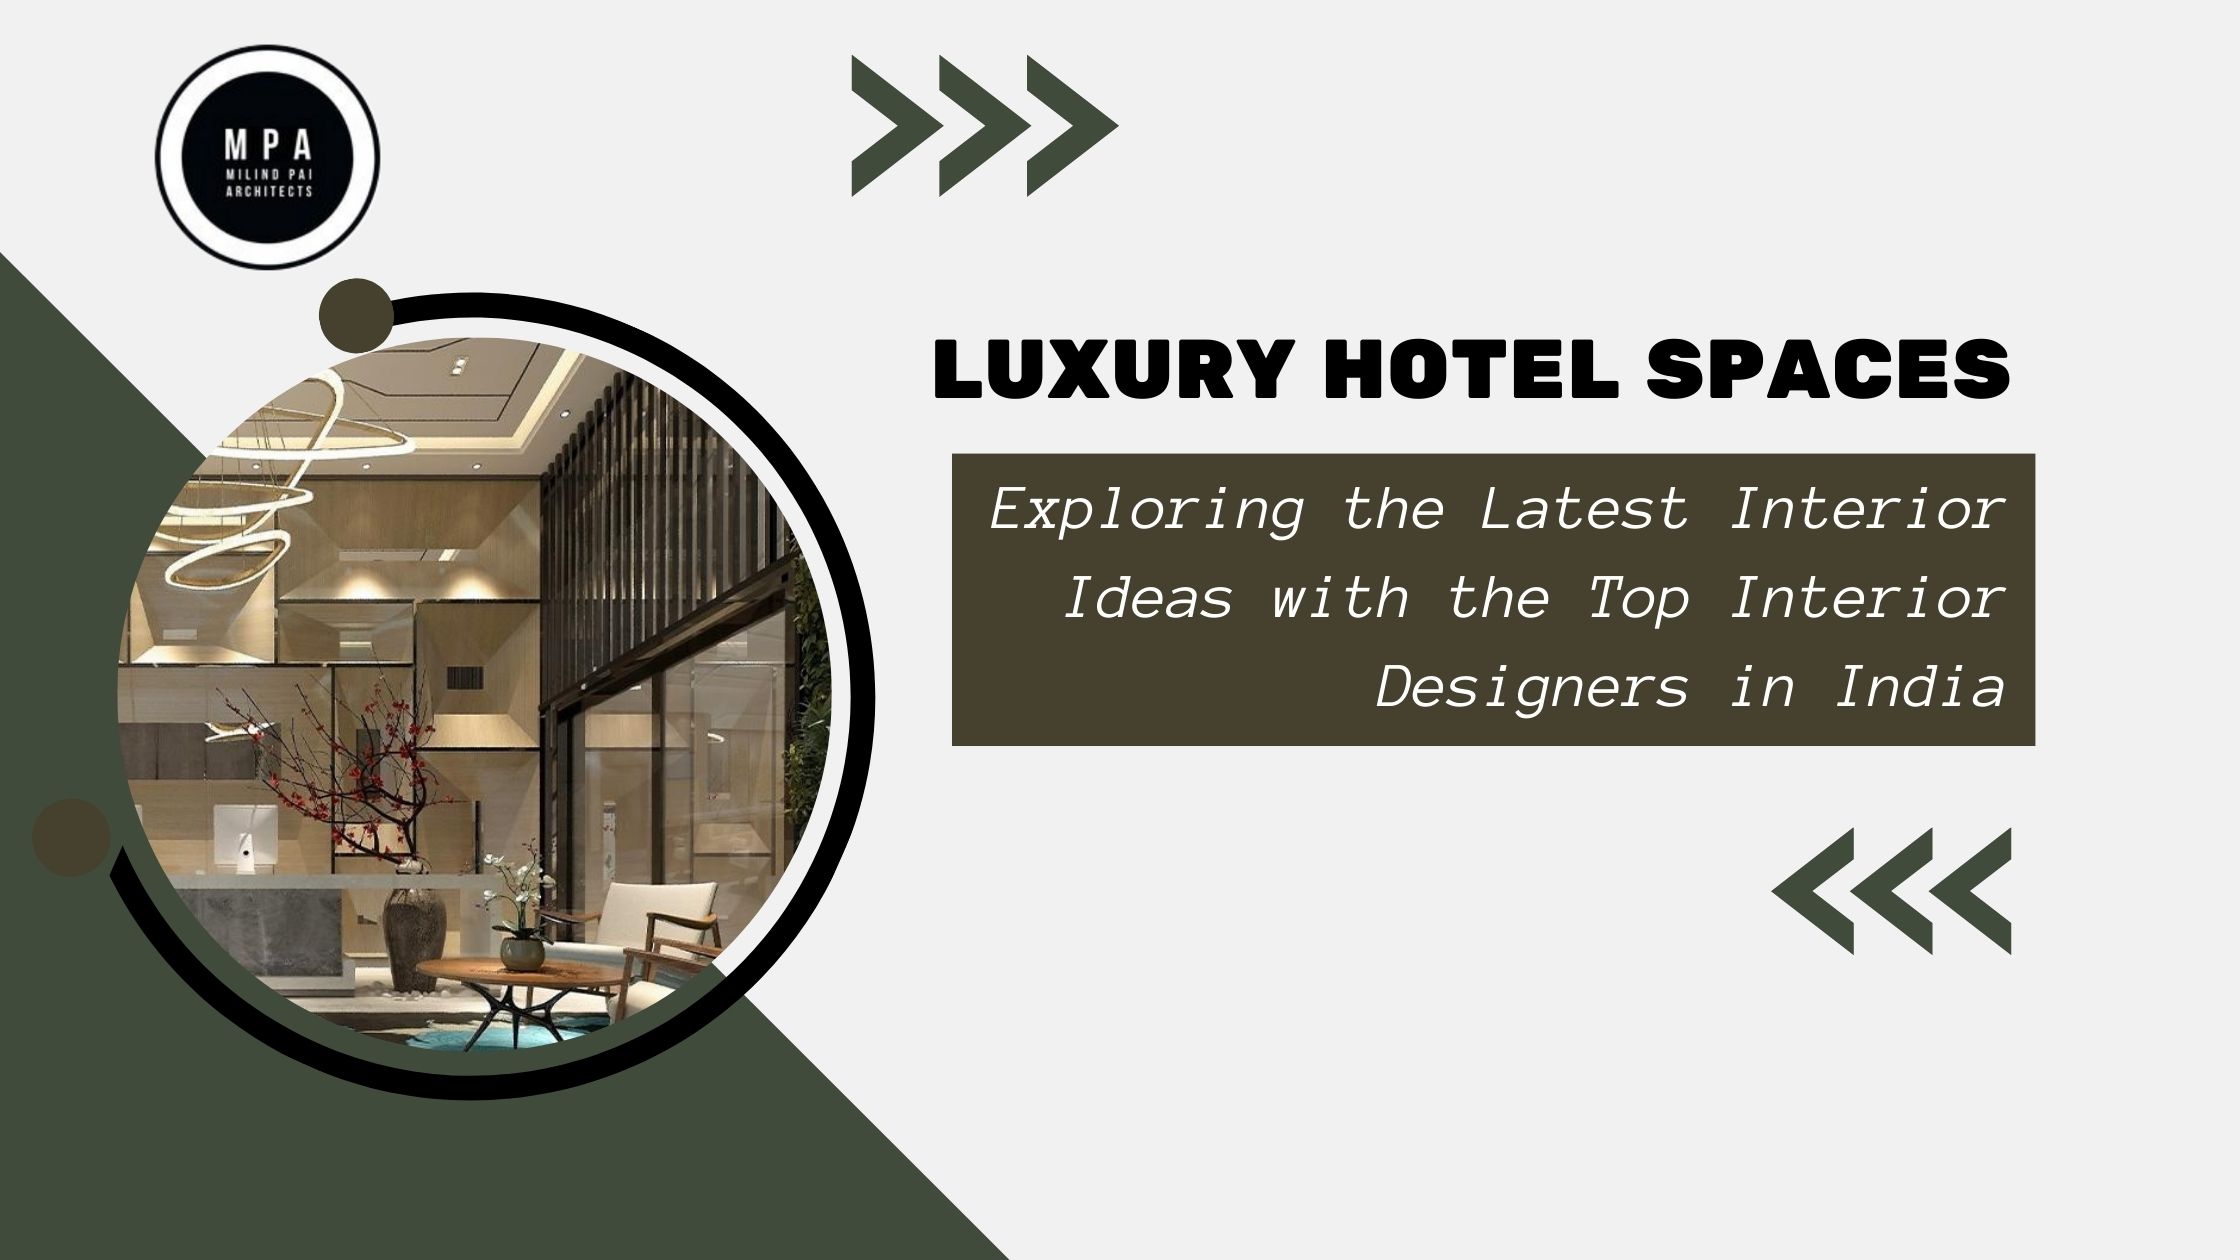 Luxury Hotel Spaces with Top Interior Designers in India